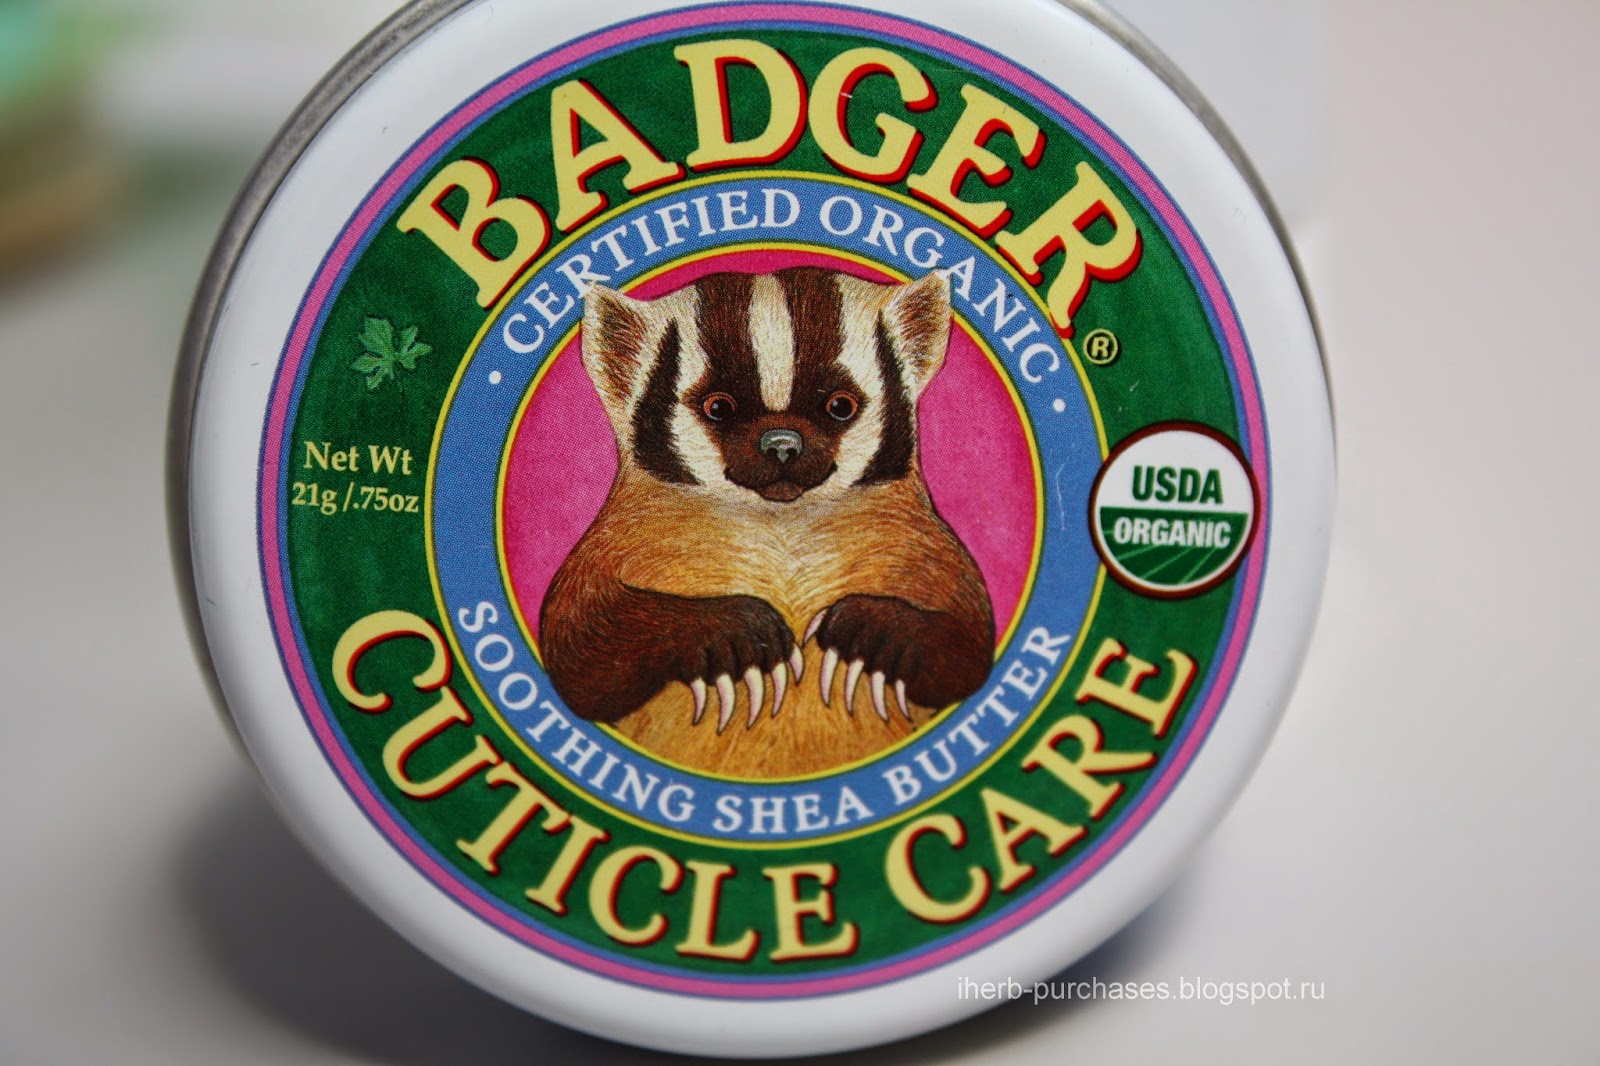 Badger Company, Organic Cuticle Care, Soothing Shea Butter, .75 oz (21 g)